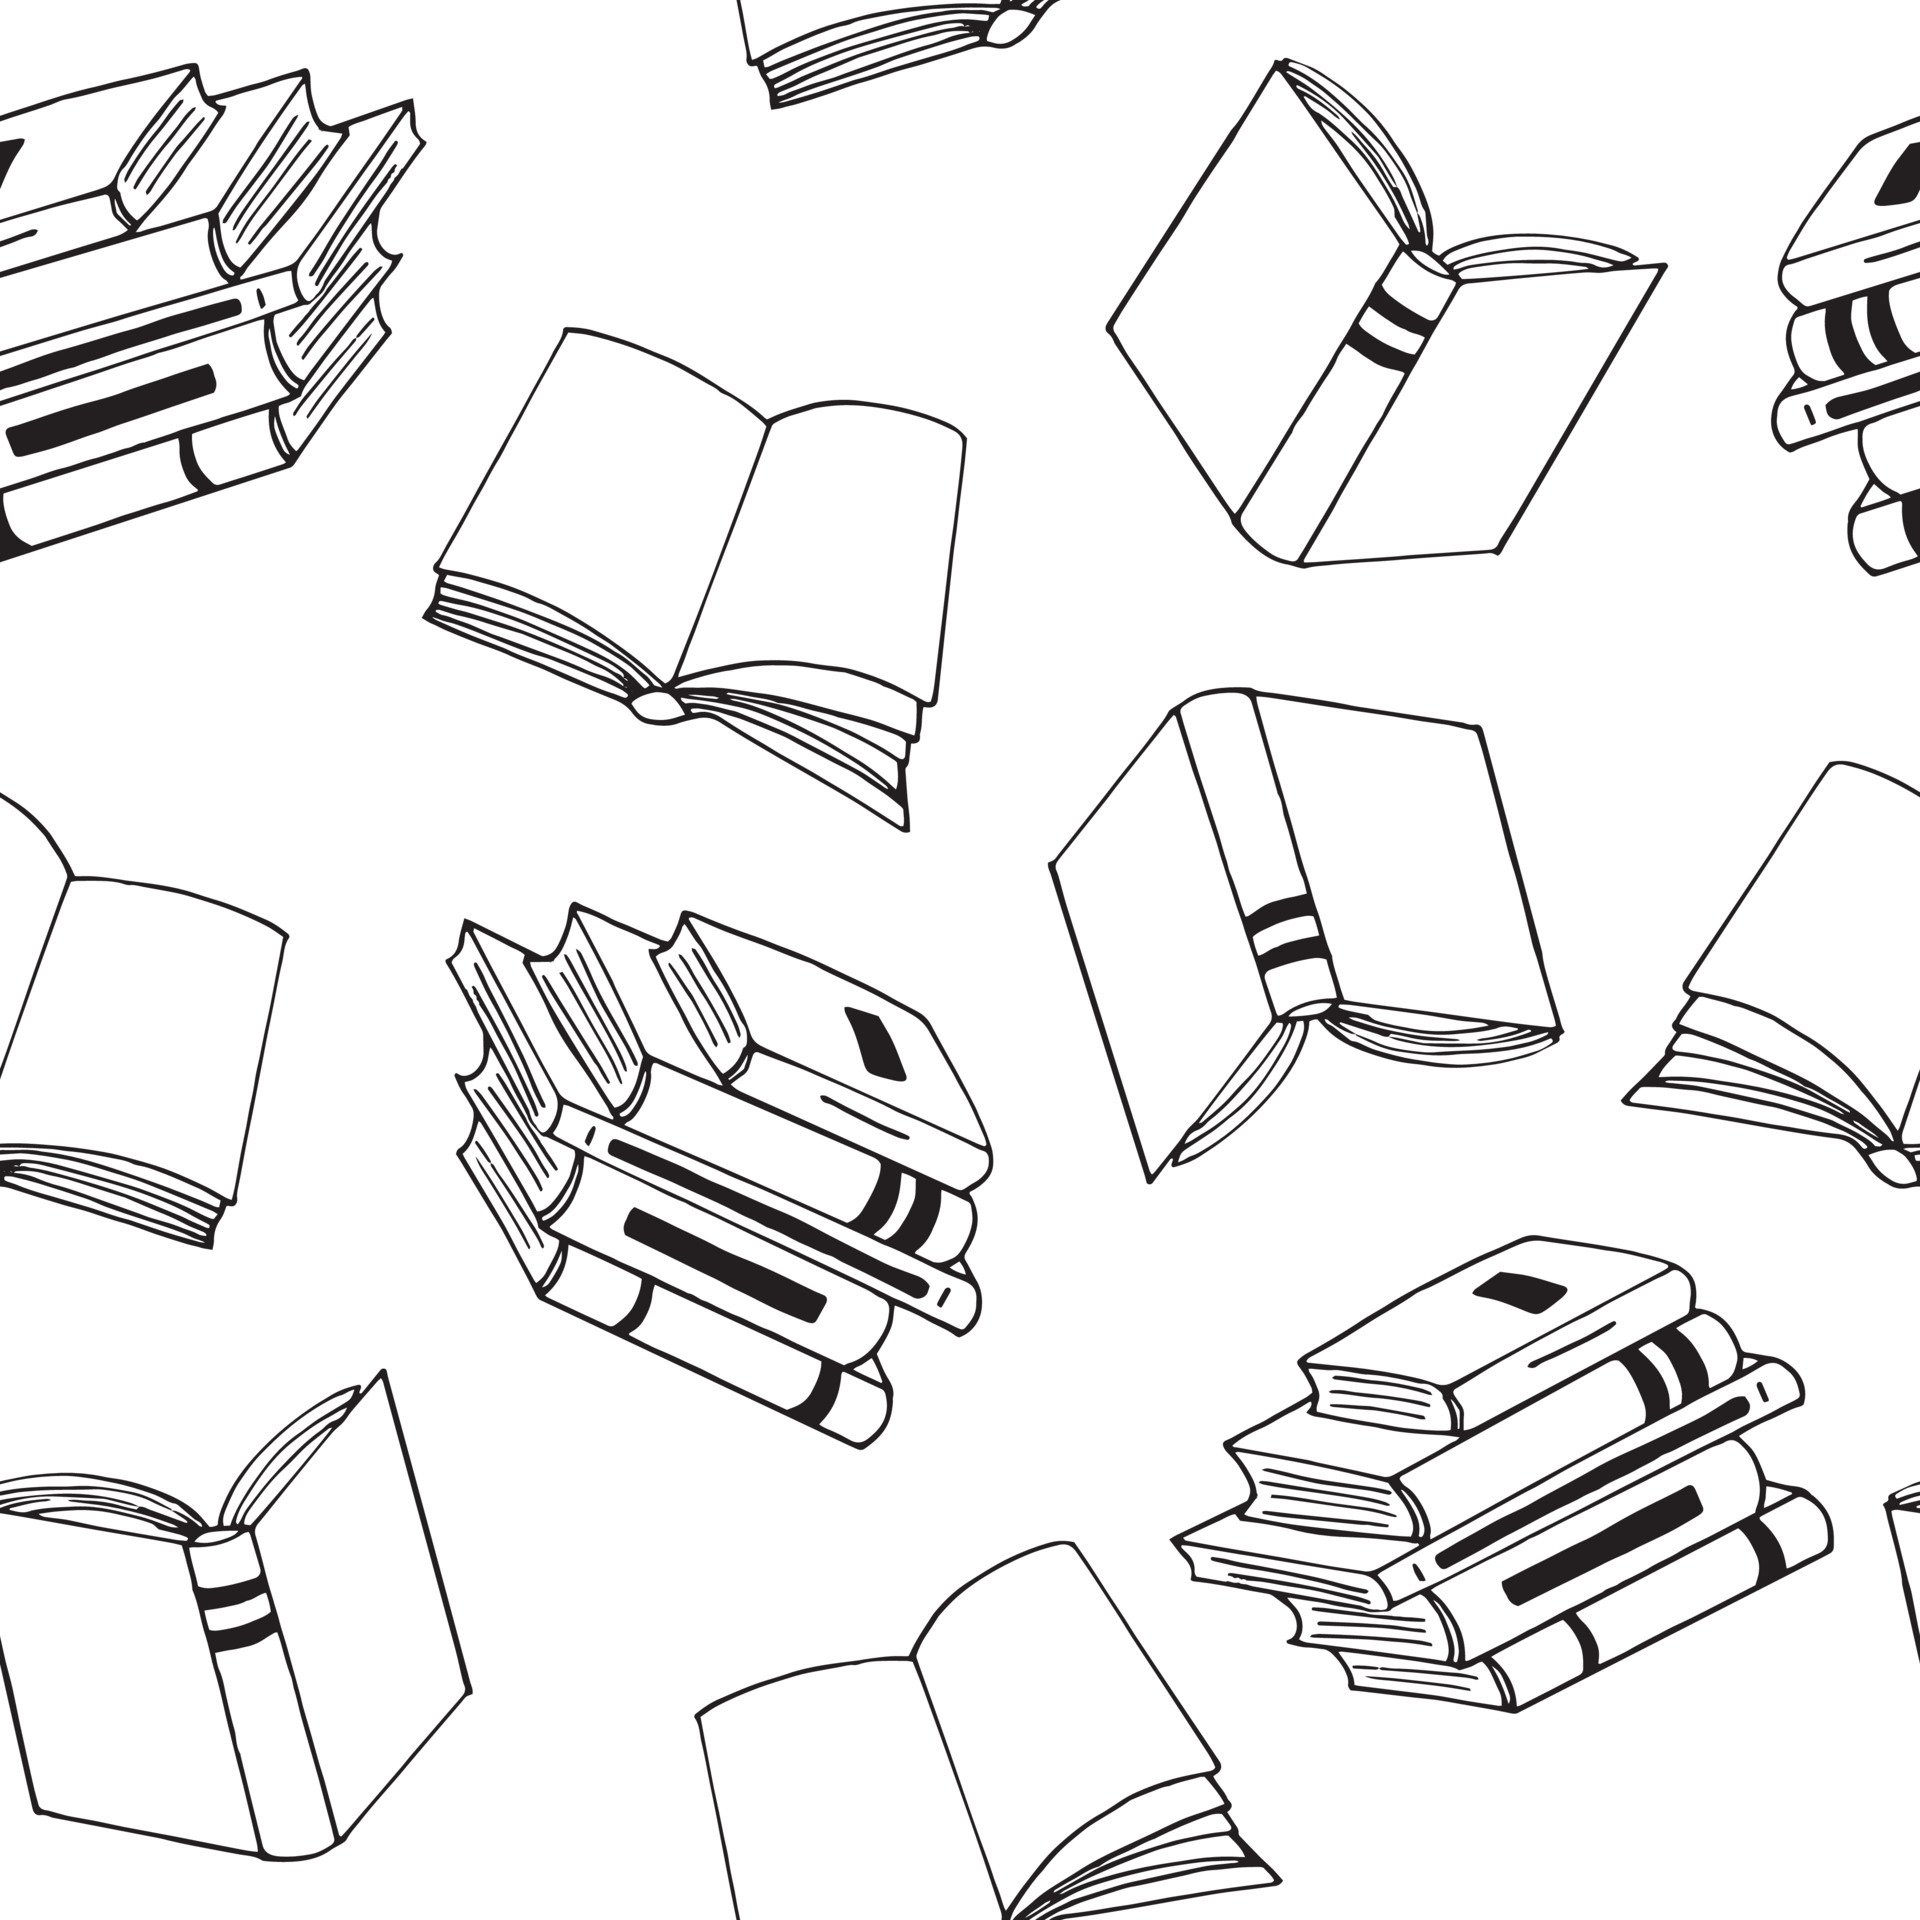 books seamless pattern. hand drawn doodle style., minimalism, monochrome, sketch. wallpaper, textile, wrapping paper background reading education bookstore science